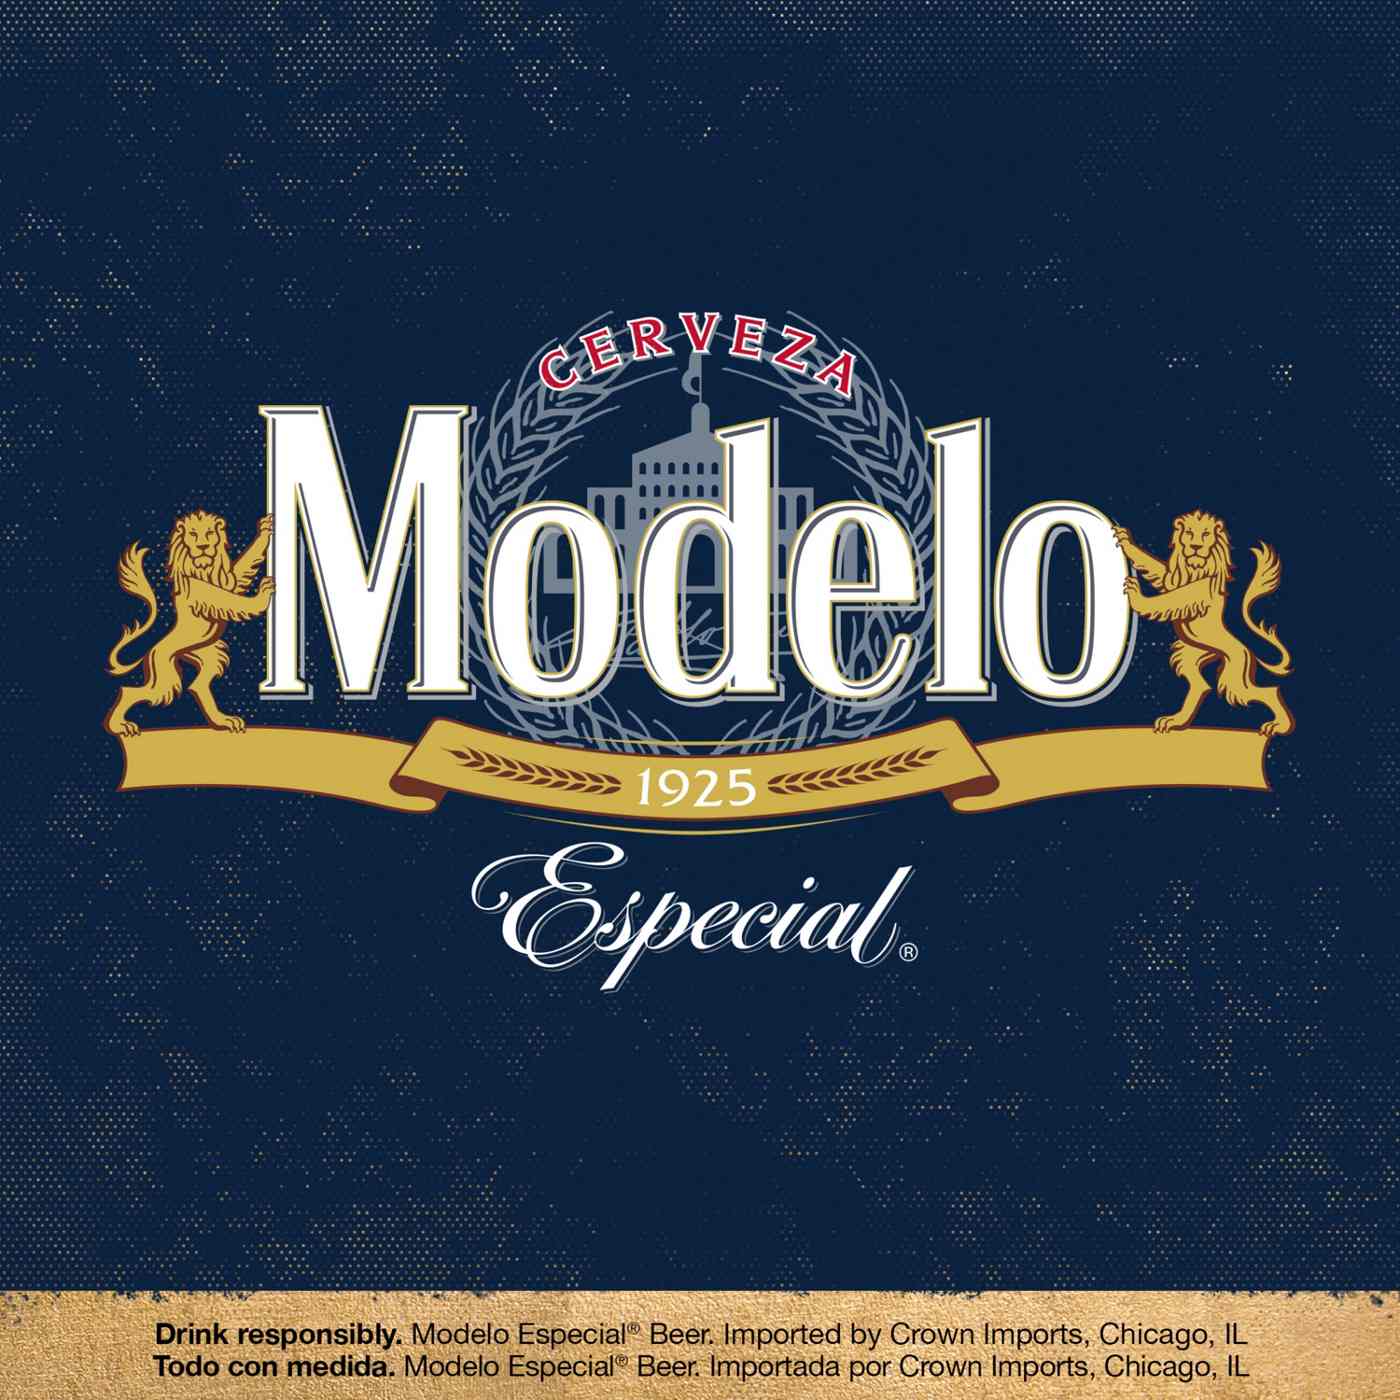 Modelo Especial Mexican Lager Import Beer 12 oz Cans, 6 pk; image 7 of 11